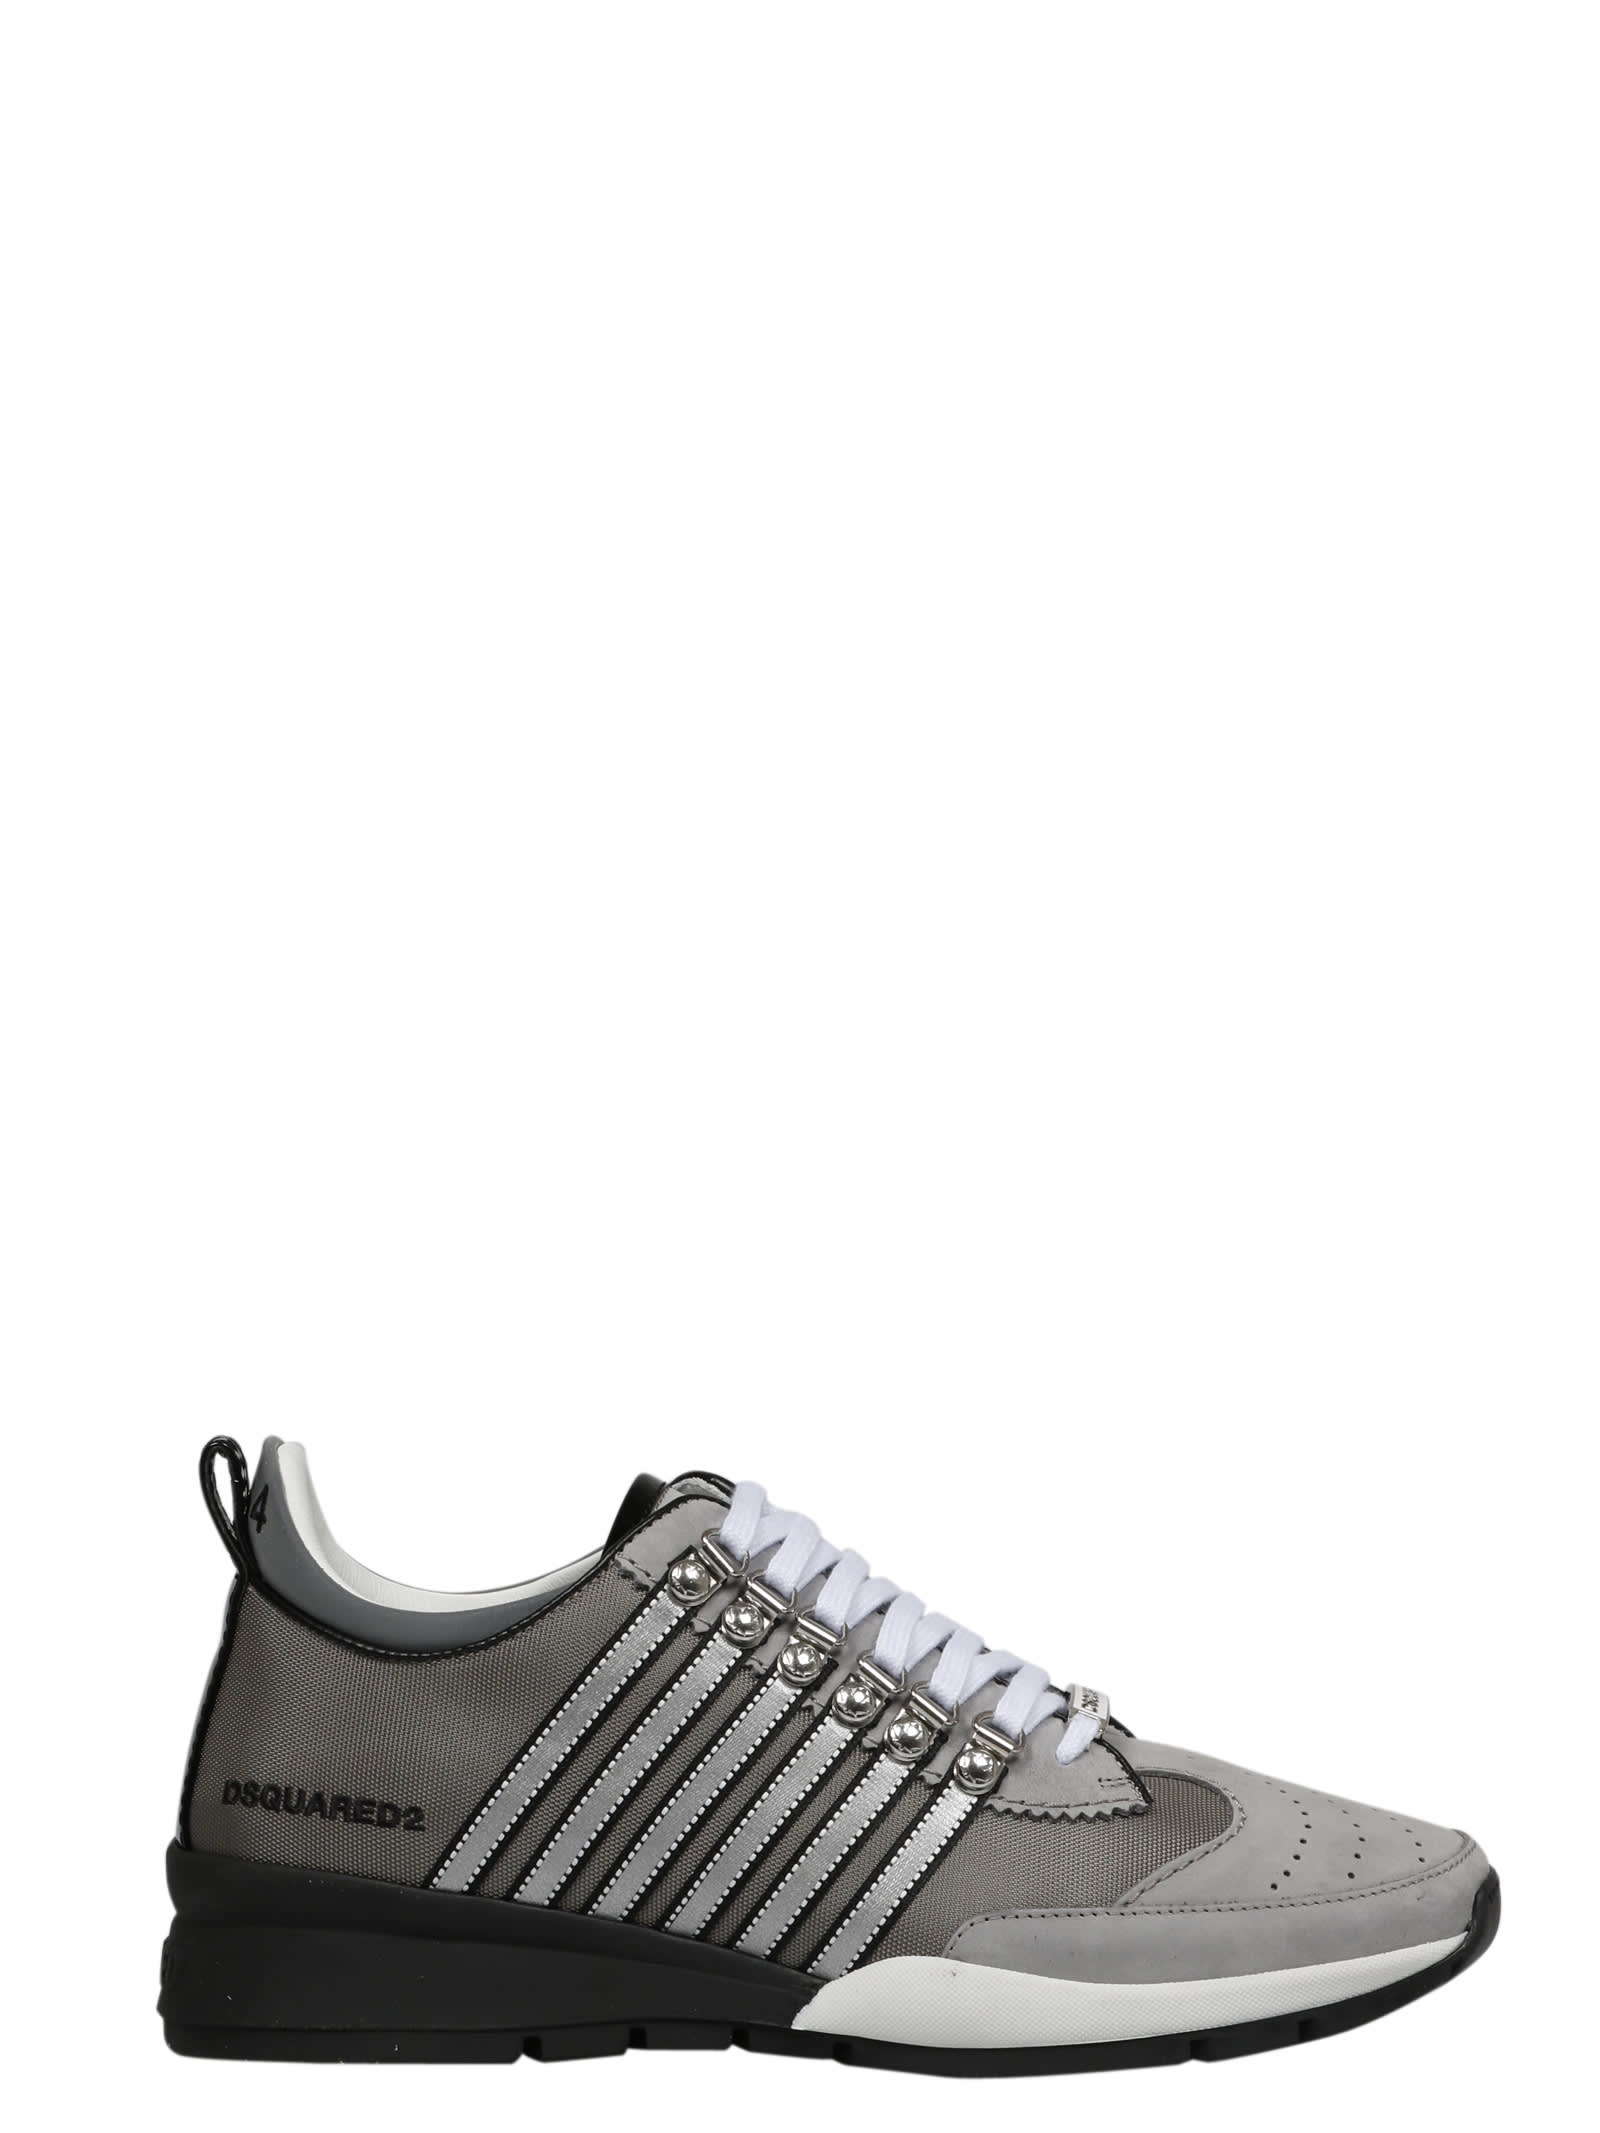 Dsquared2 Lace-up Low Top 251 Sneakers